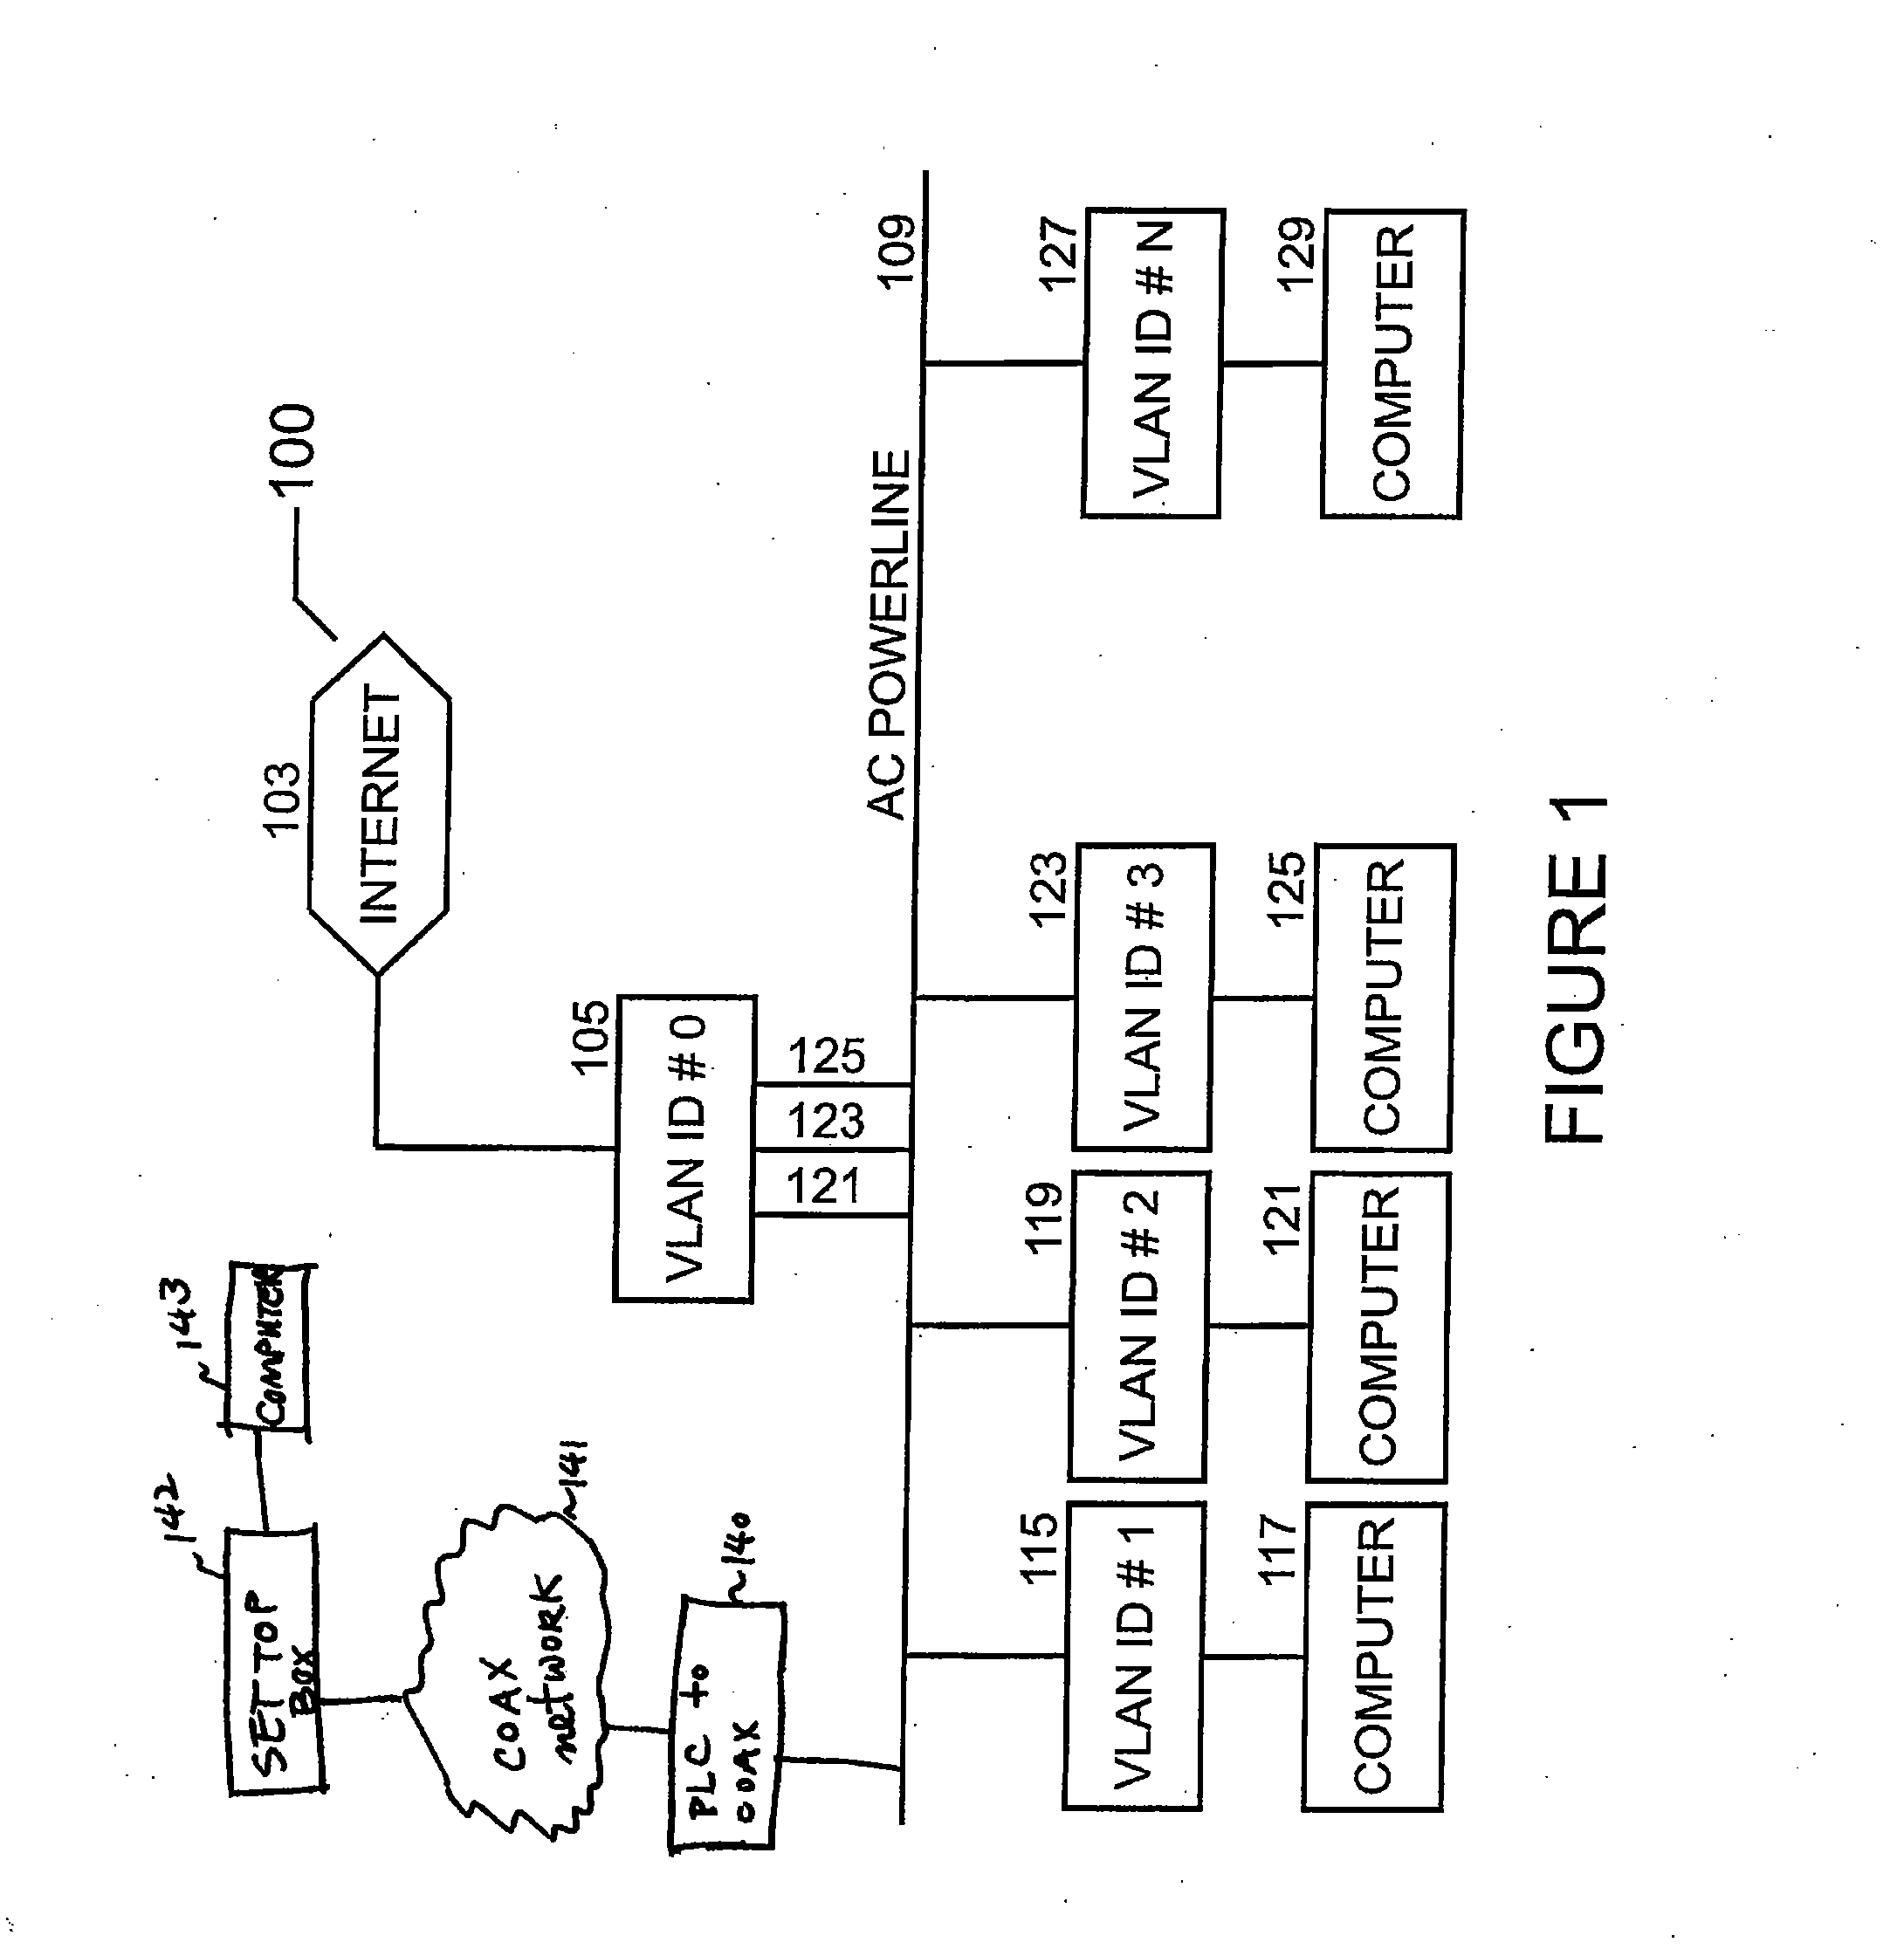 Method and system for powerline local area networks over coaxial cable